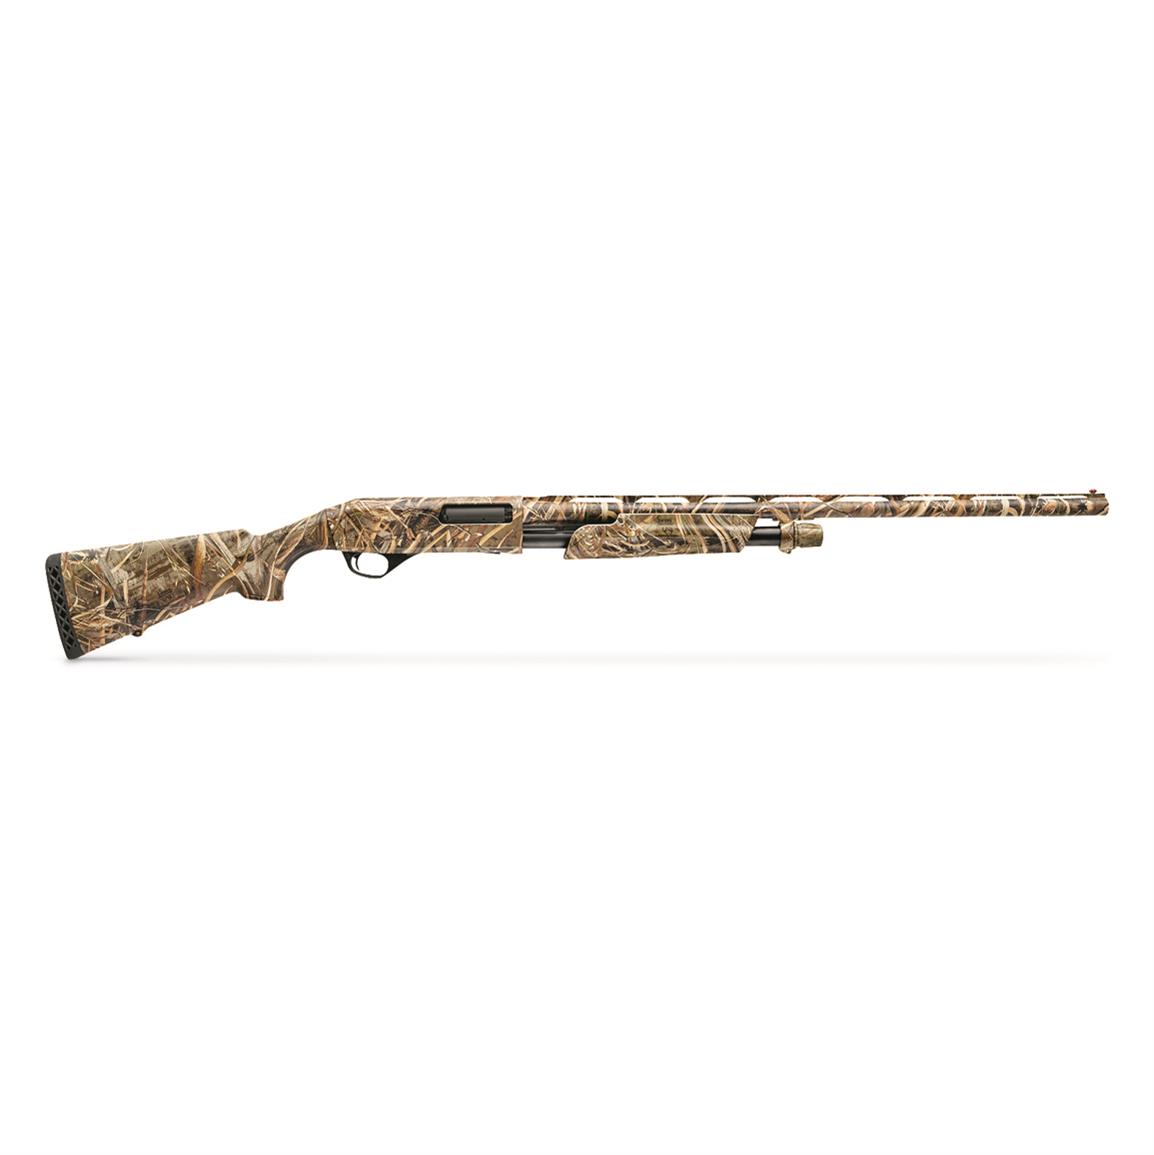 Stoeger P3500, Pump Action, 12 Gauge, 26&quot; Barrel, Realtree Max-5 Synthetic Stock, 4+1 Rounds